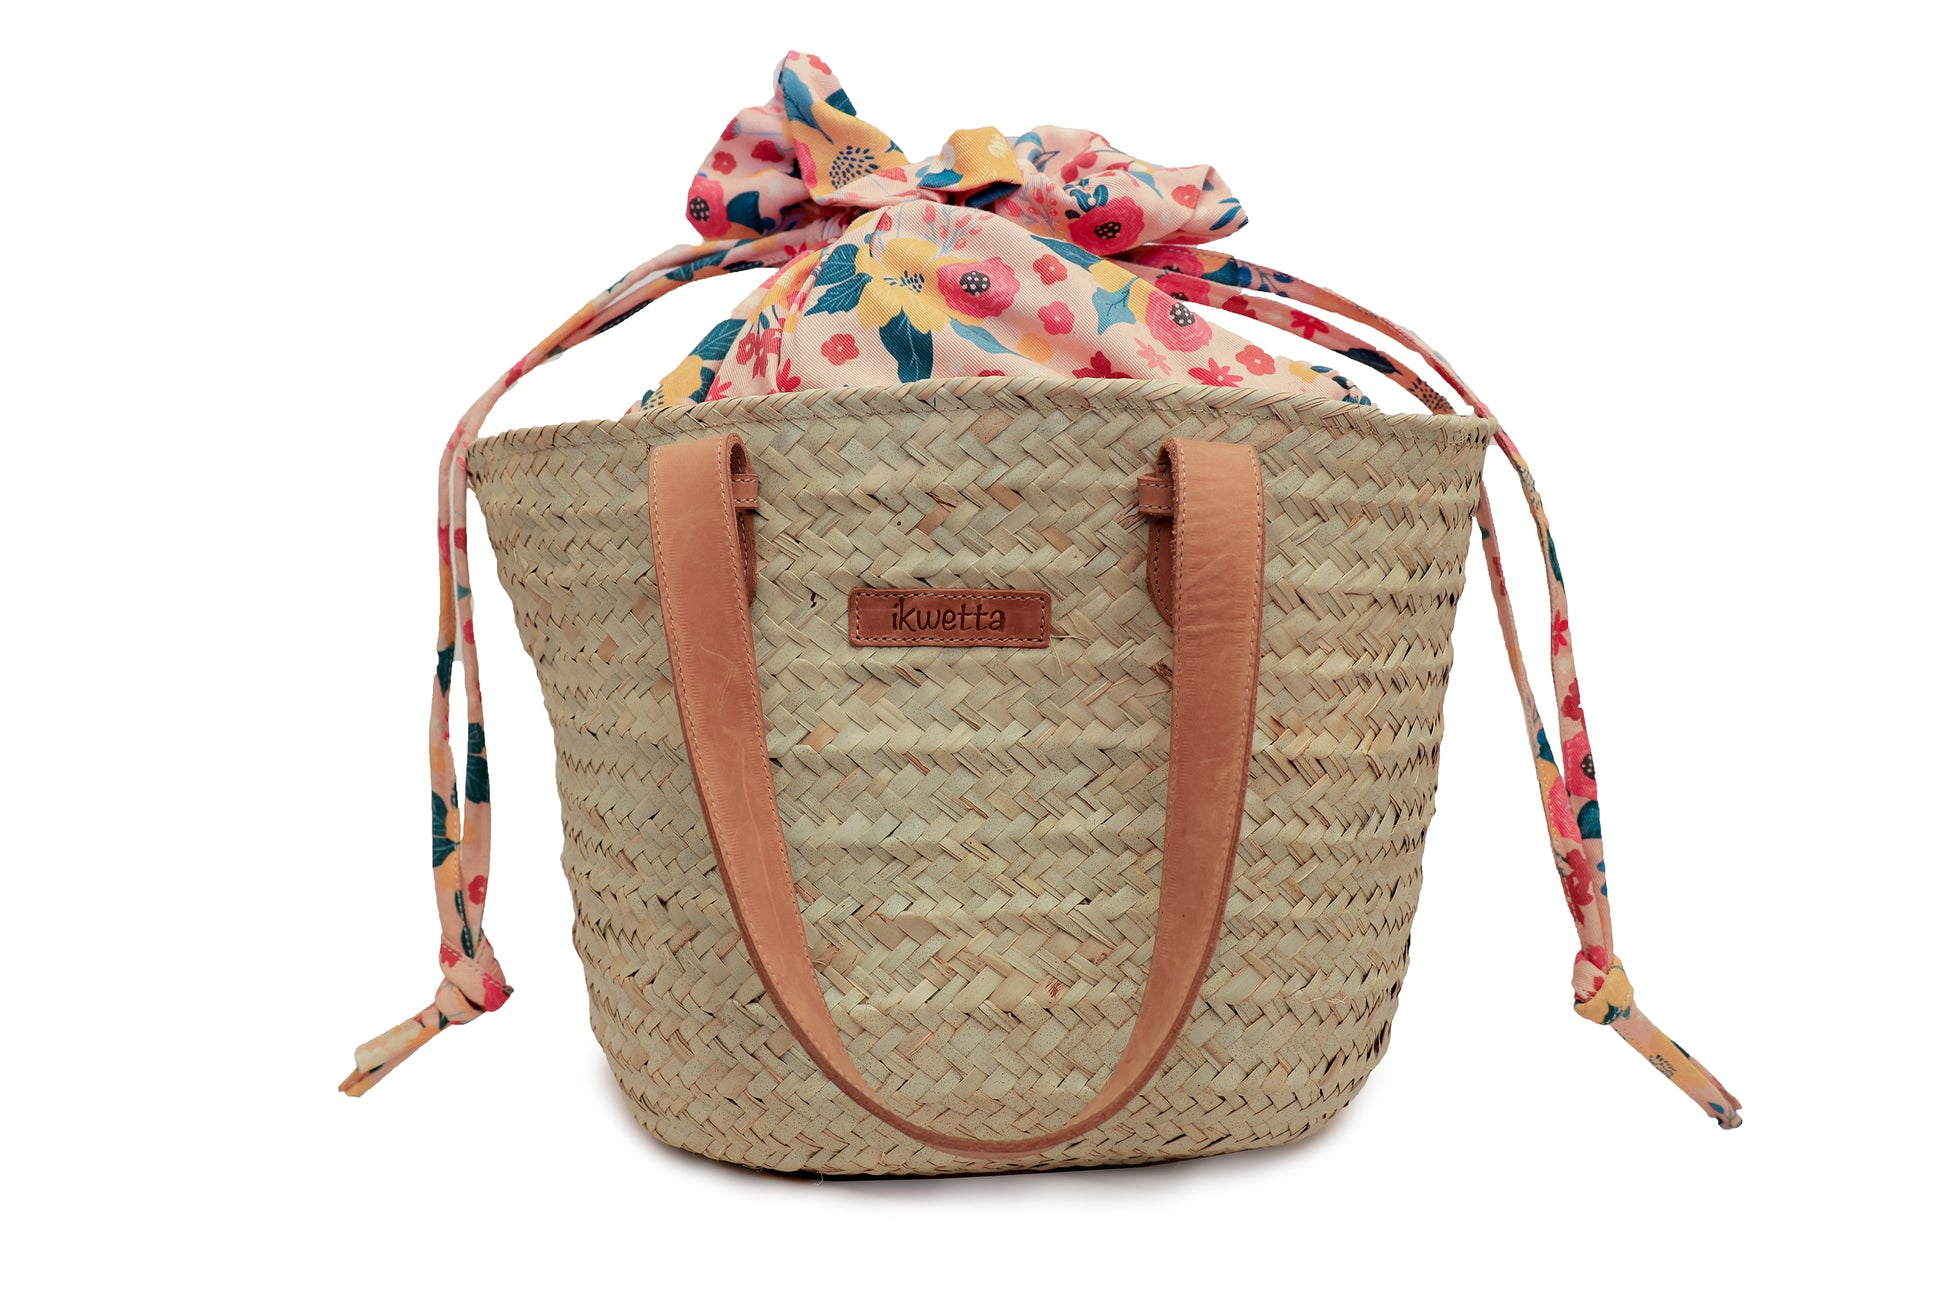 Kapu basket handcrafted with sisal, leather handles and canvas